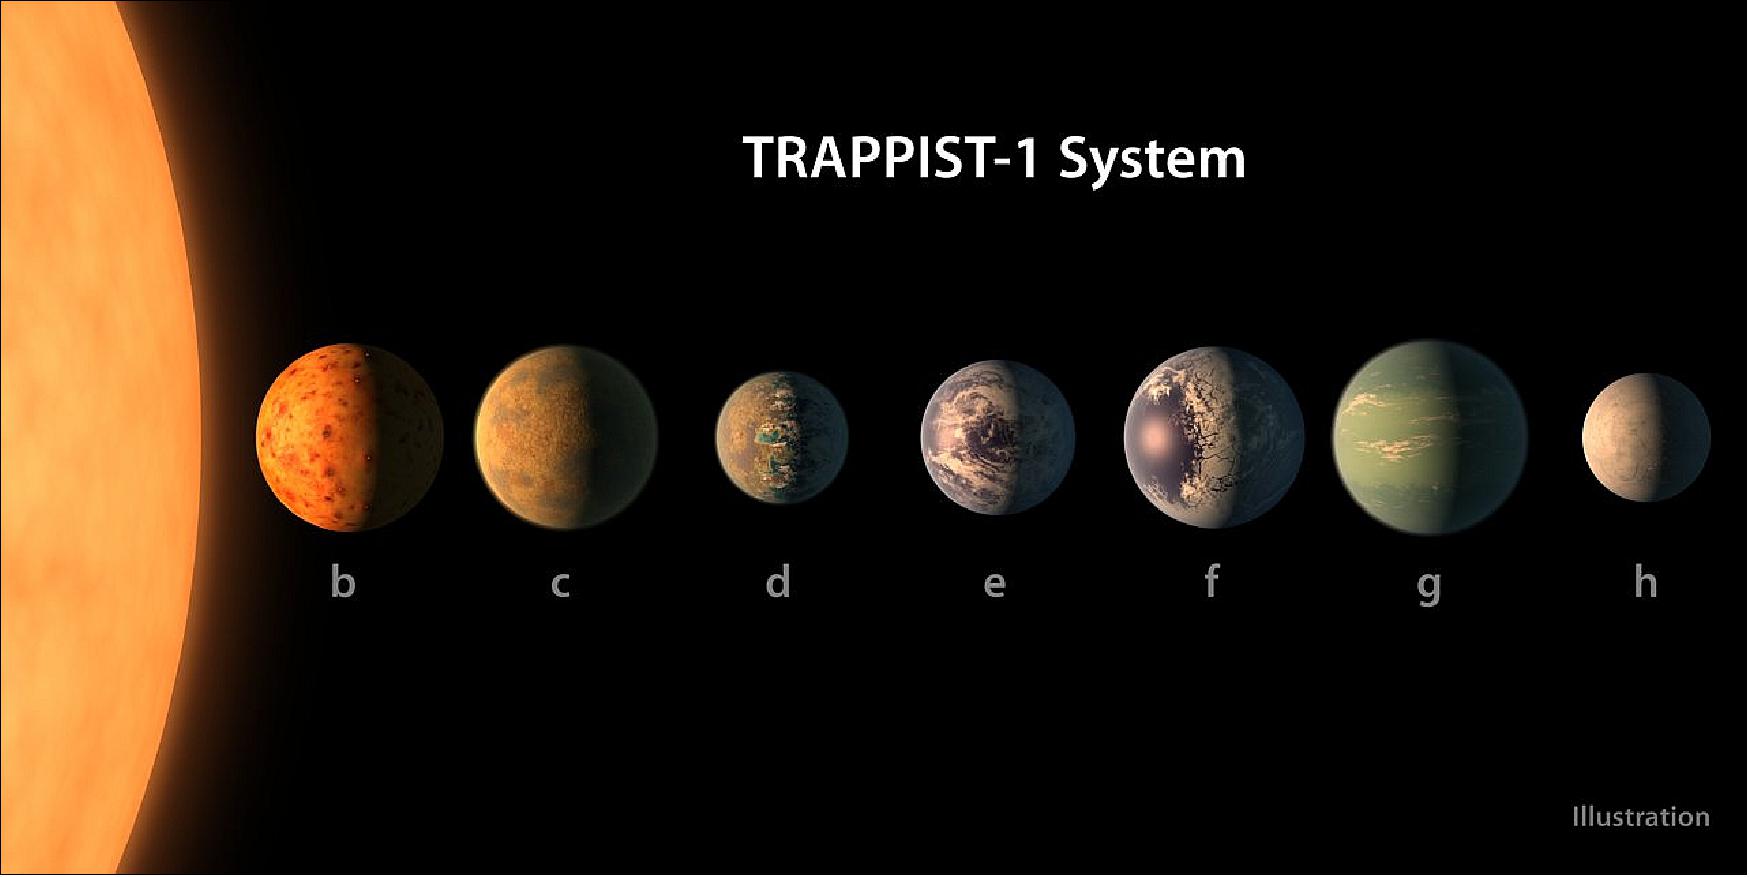 Figure 6: Five of the seven planets orbiting the dwarf star have been discovered in 2016 with the ground-based TRAPPIST telescope located in La Silla, Chile. The seven planets of TRAPPIST-1 are all Earth-sized and terrestrial, according to research published in 2017 in the journal Nature. TRAPPIST-1 is an ultra-cool dwarf star in the constellation Aquarius, and its planets orbit very close to it (image credit: TRAPIST-1 Team, NASA, R. Hurt/T. Pyle) 16)